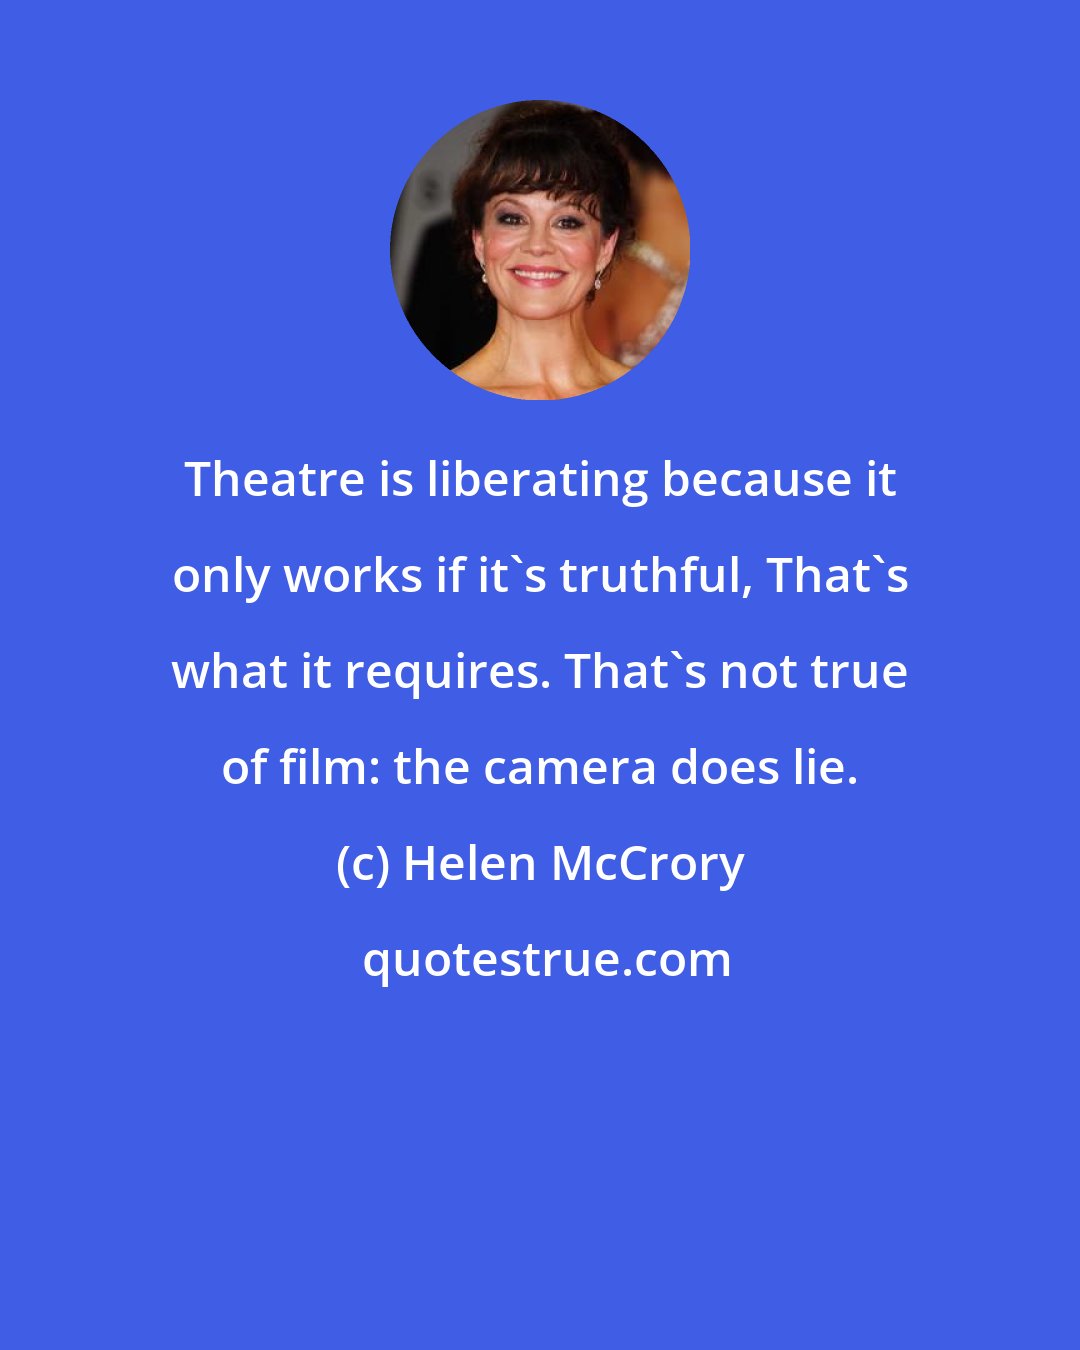 Helen McCrory: Theatre is liberating because it only works if it's truthful, That's what it requires. That's not true of film: the camera does lie.